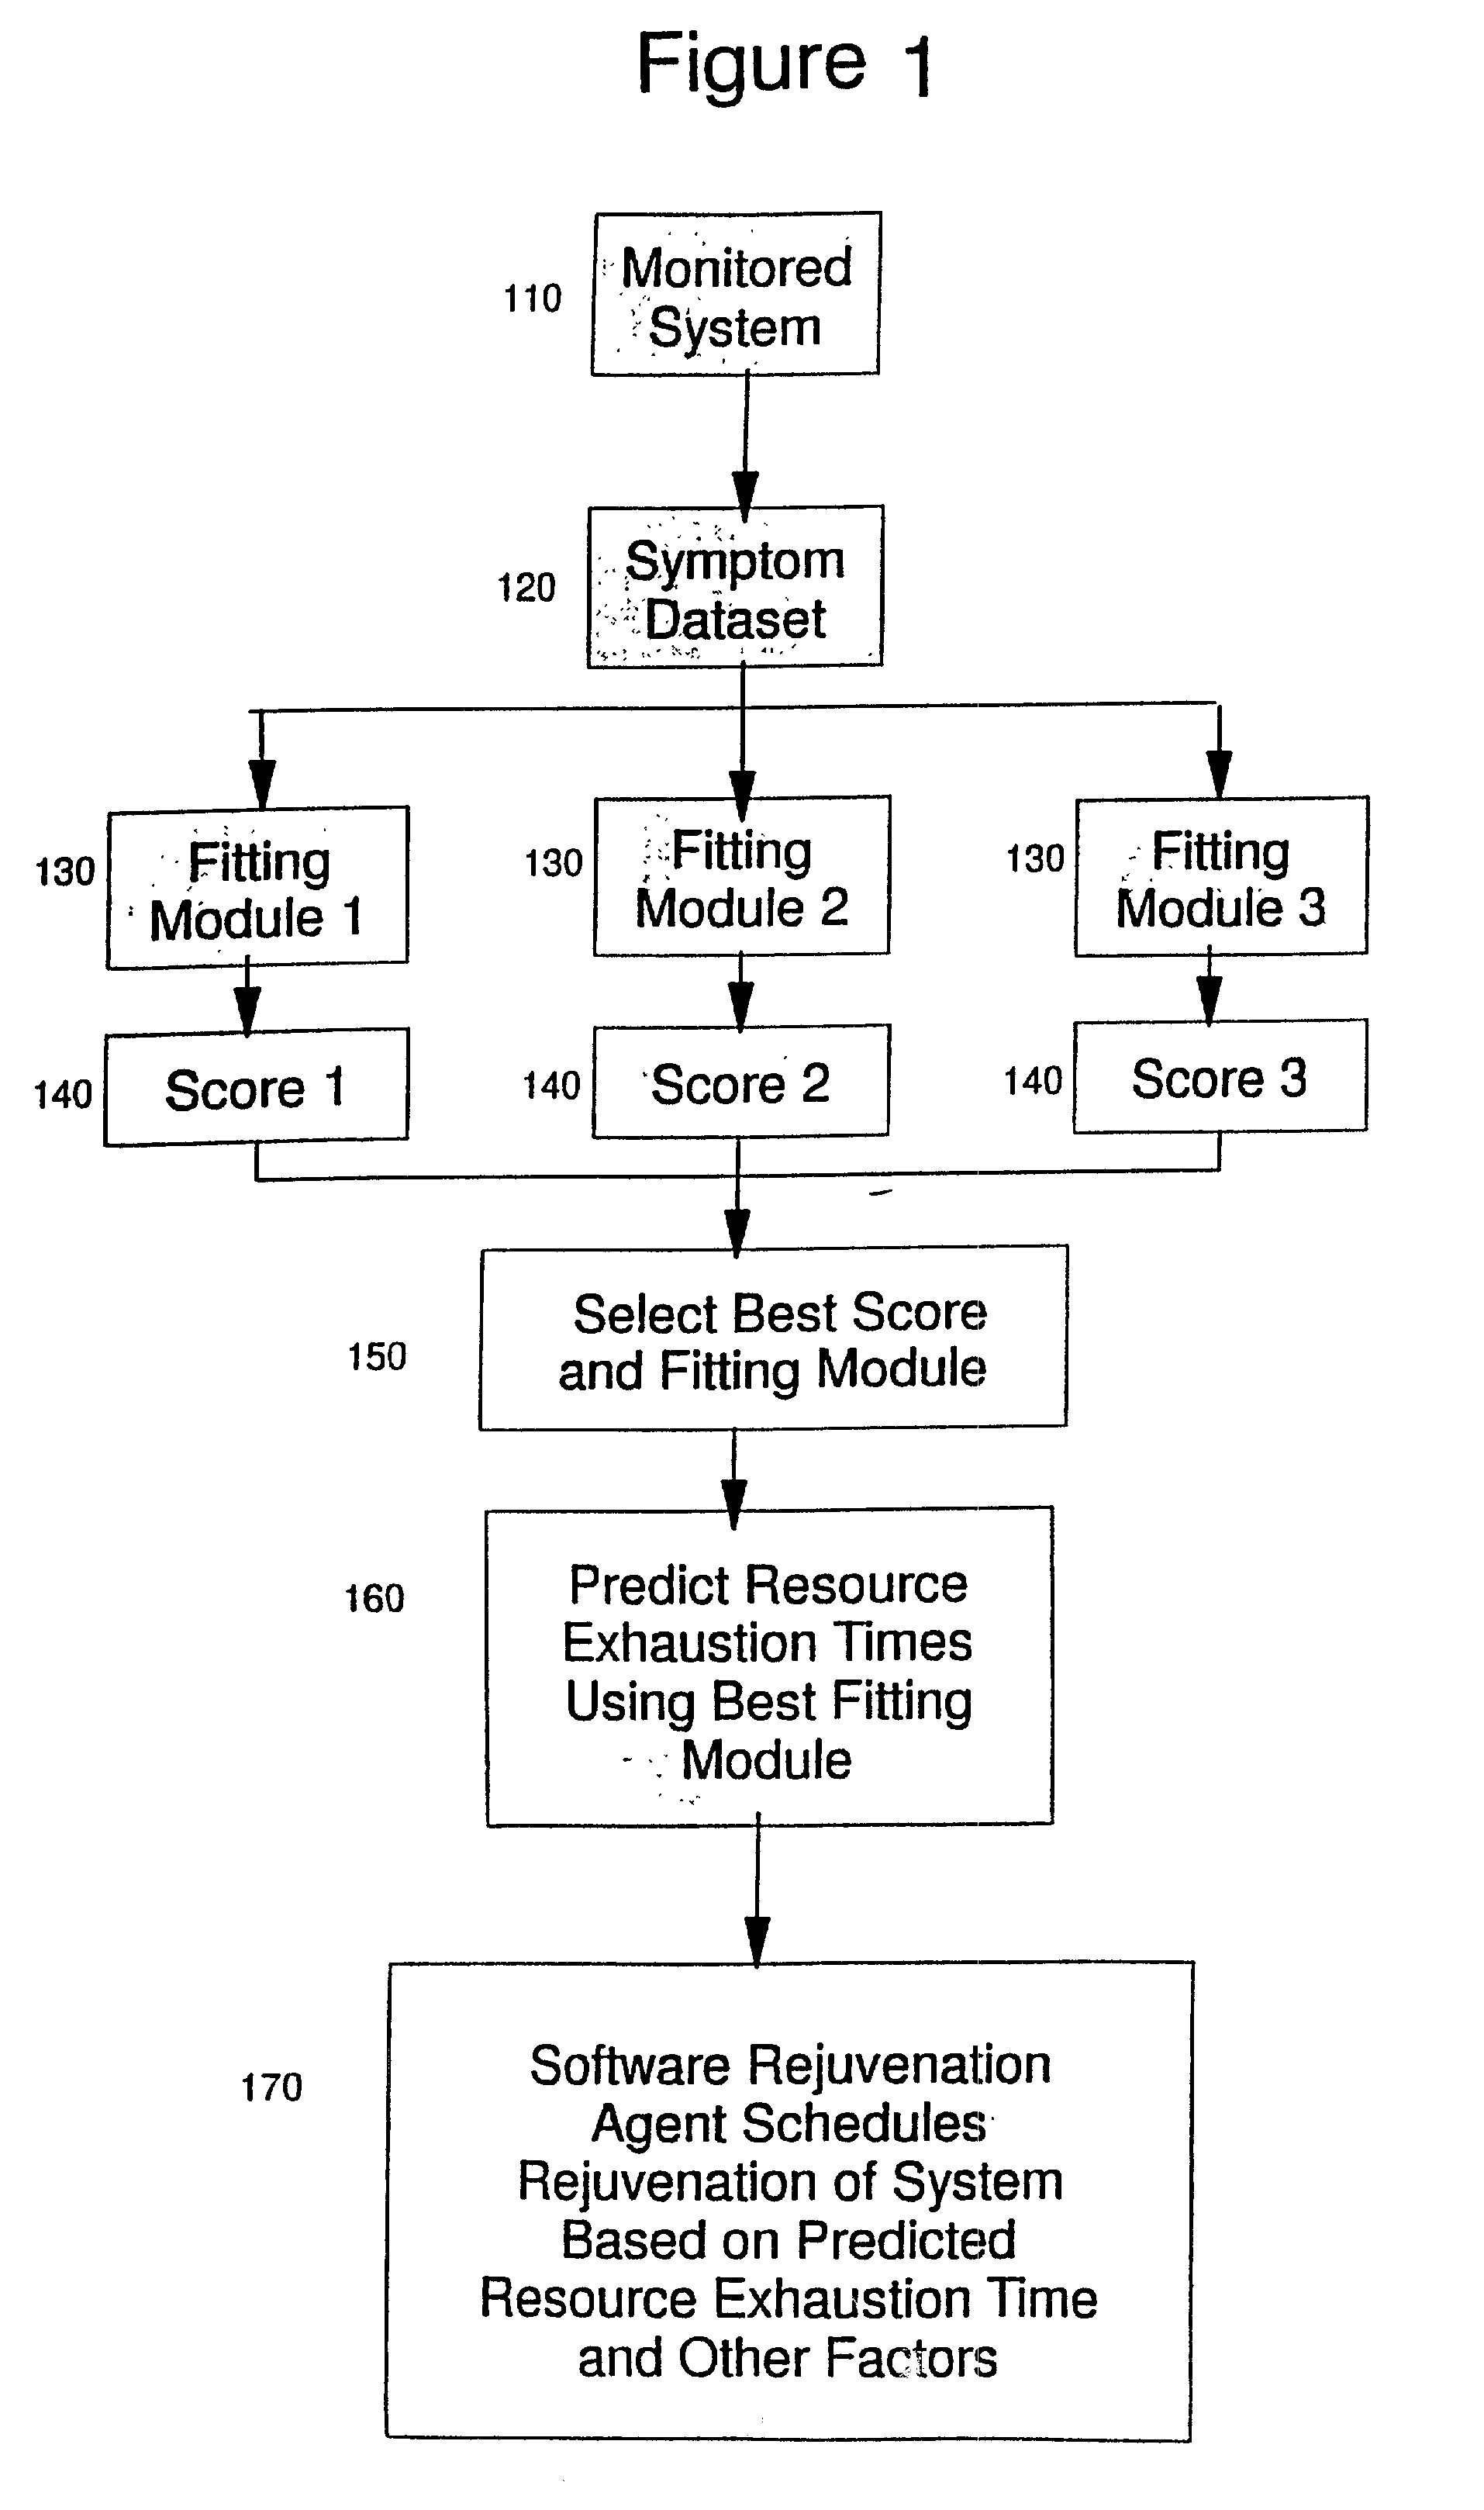 Method and system for software rejuvenation via flexible resource exhaustion prediction